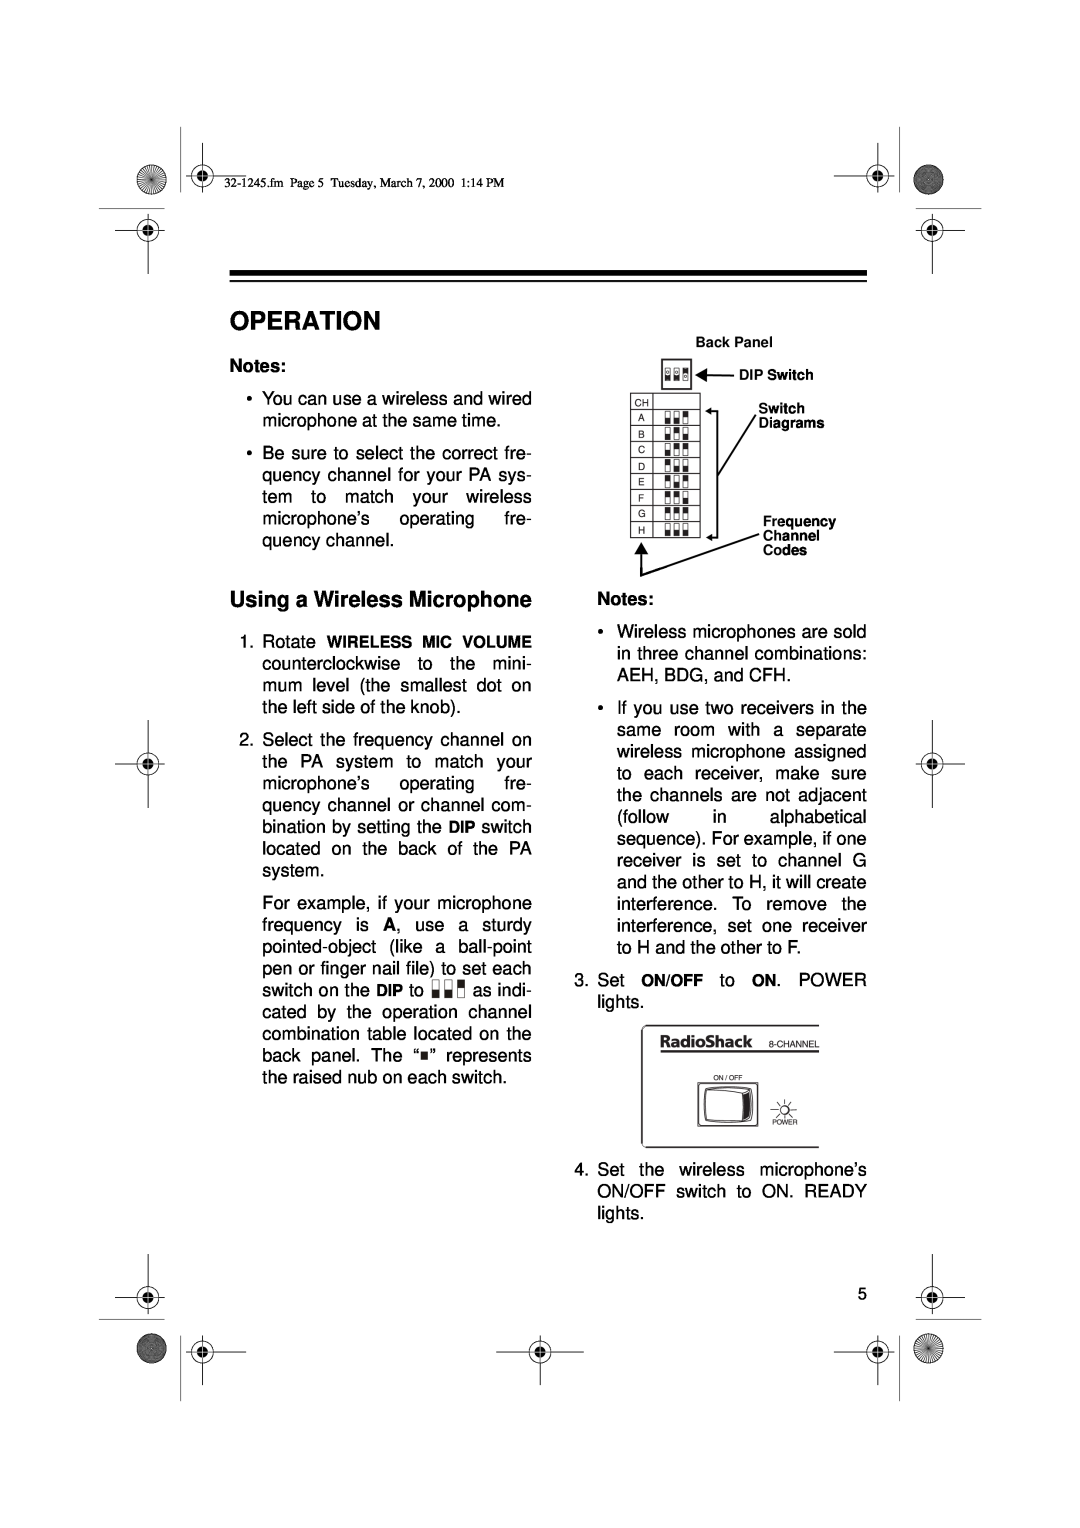 Ricoh 32-1245 owner manual Operation, Using a Wireless Microphone 